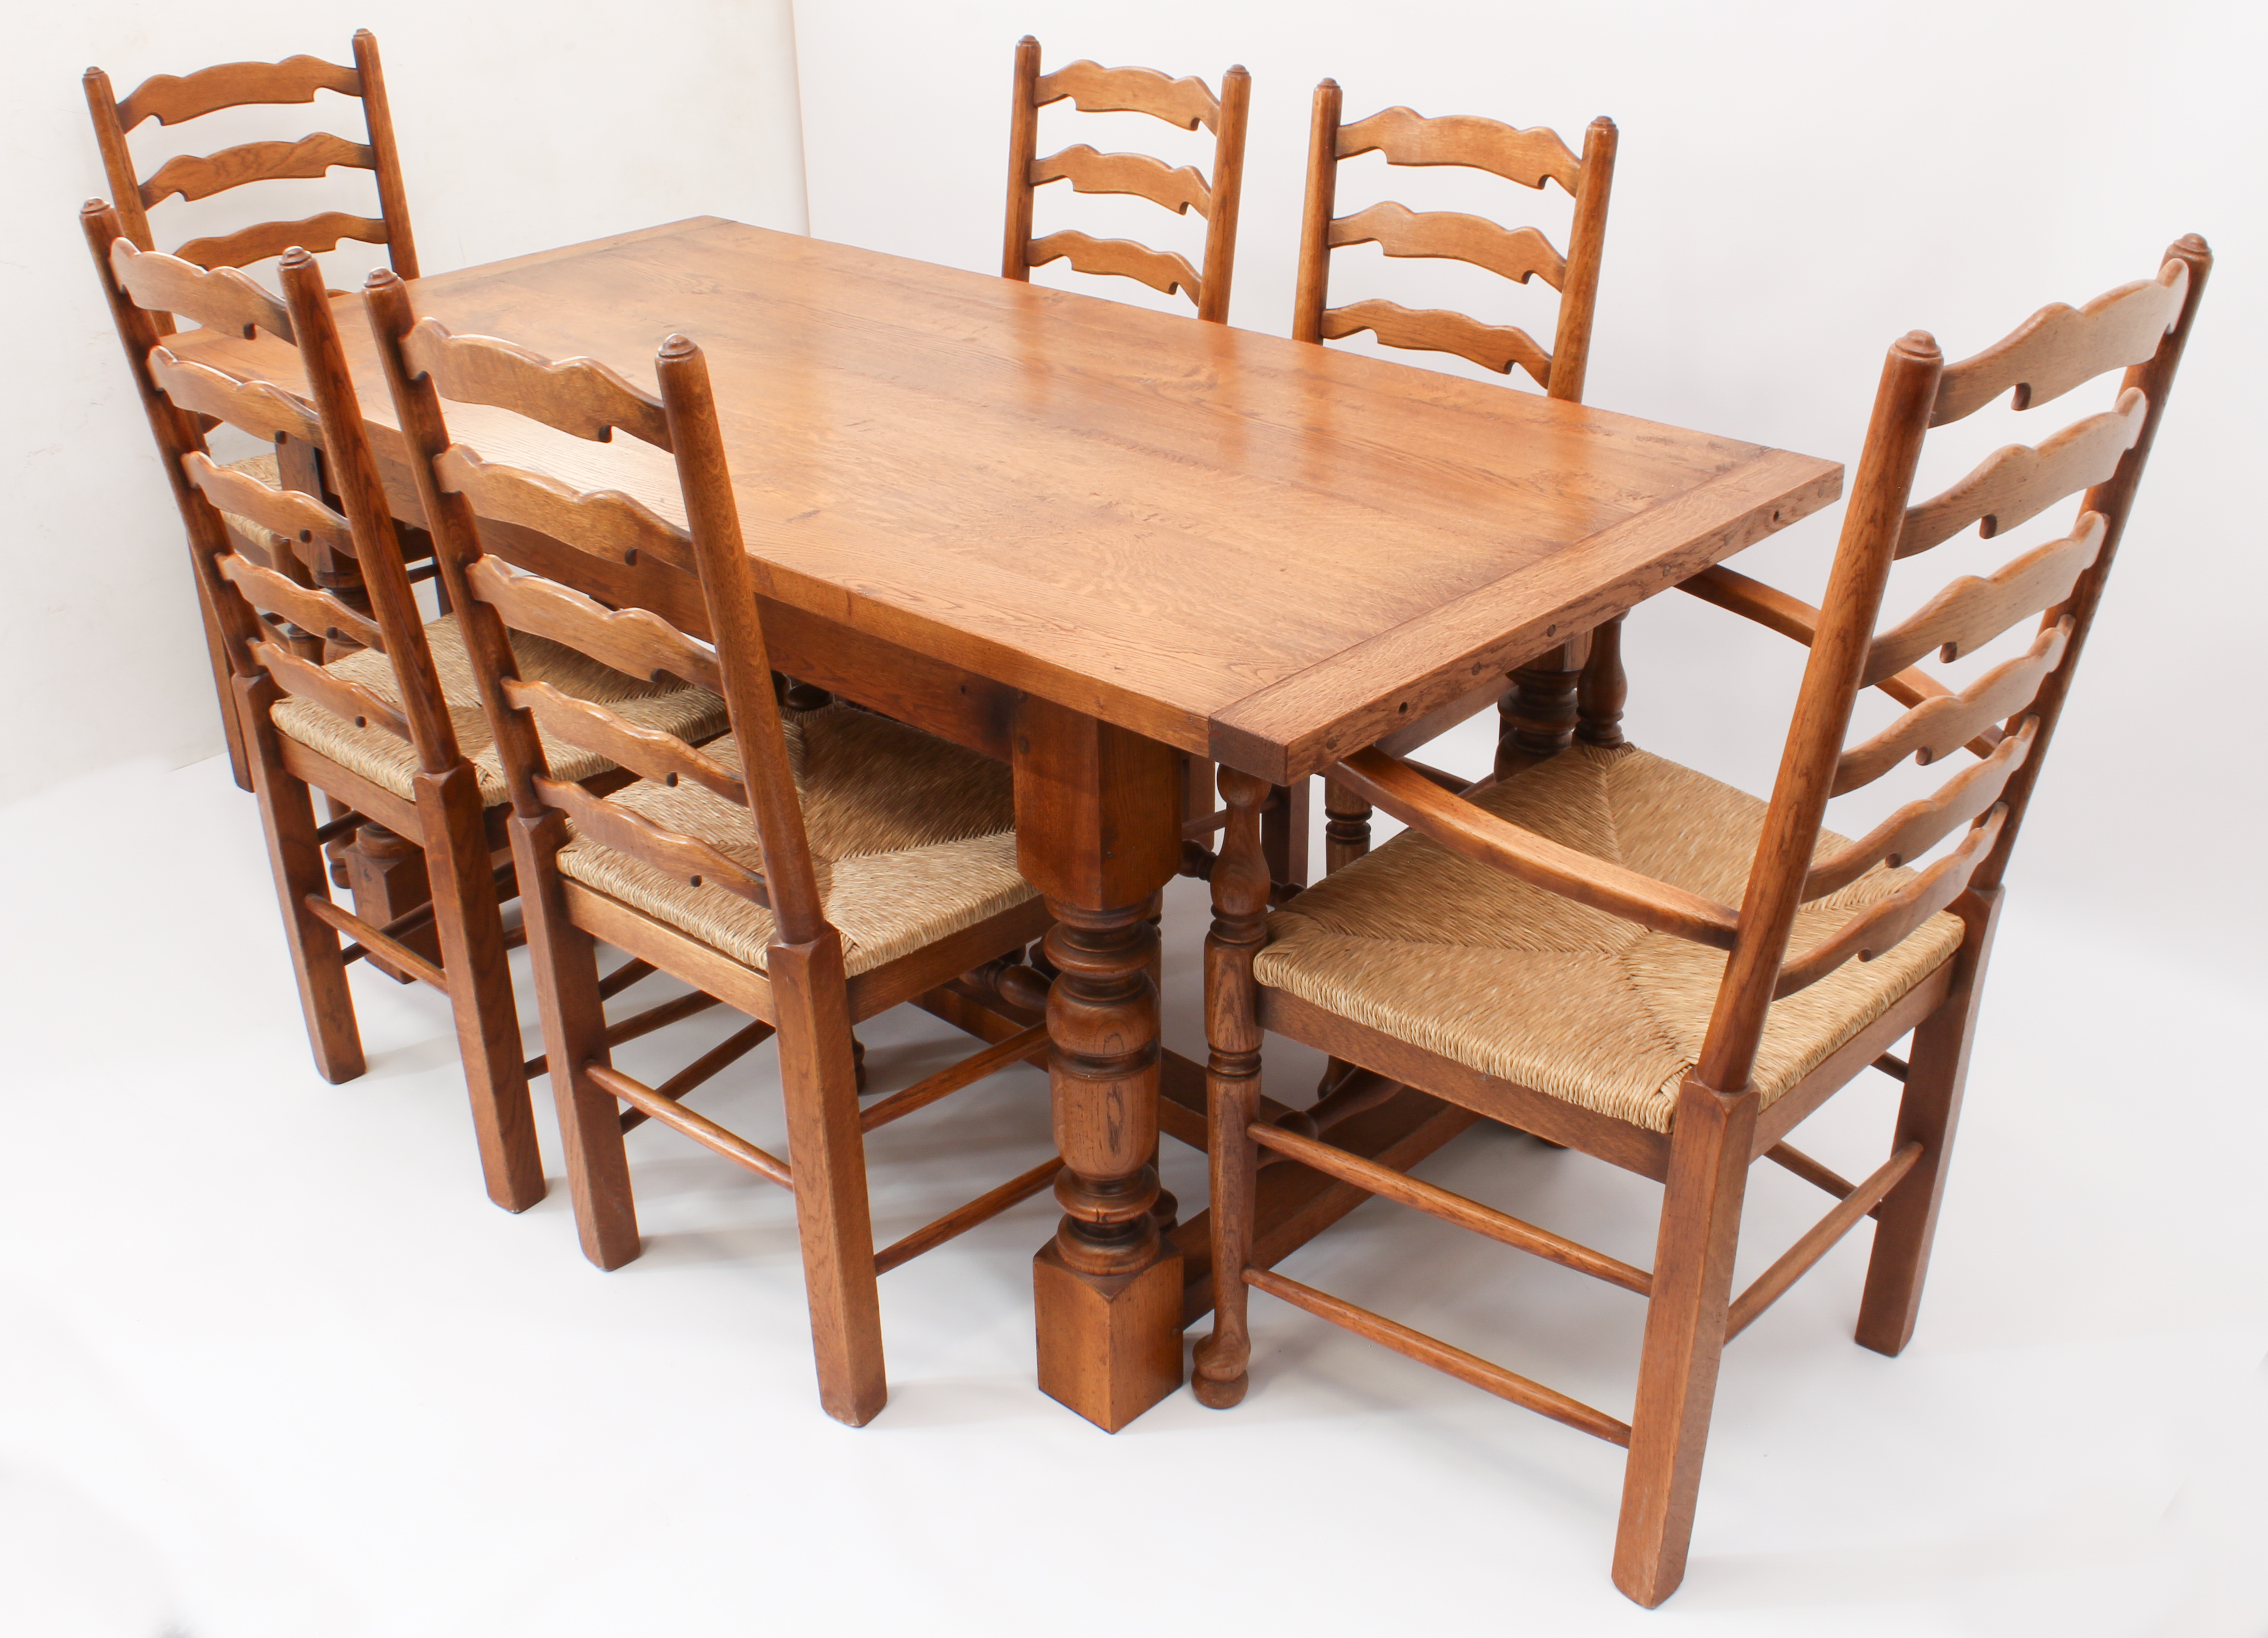 An oak extending refectory style dining table and six ladderback chairs - in the 18th century style,